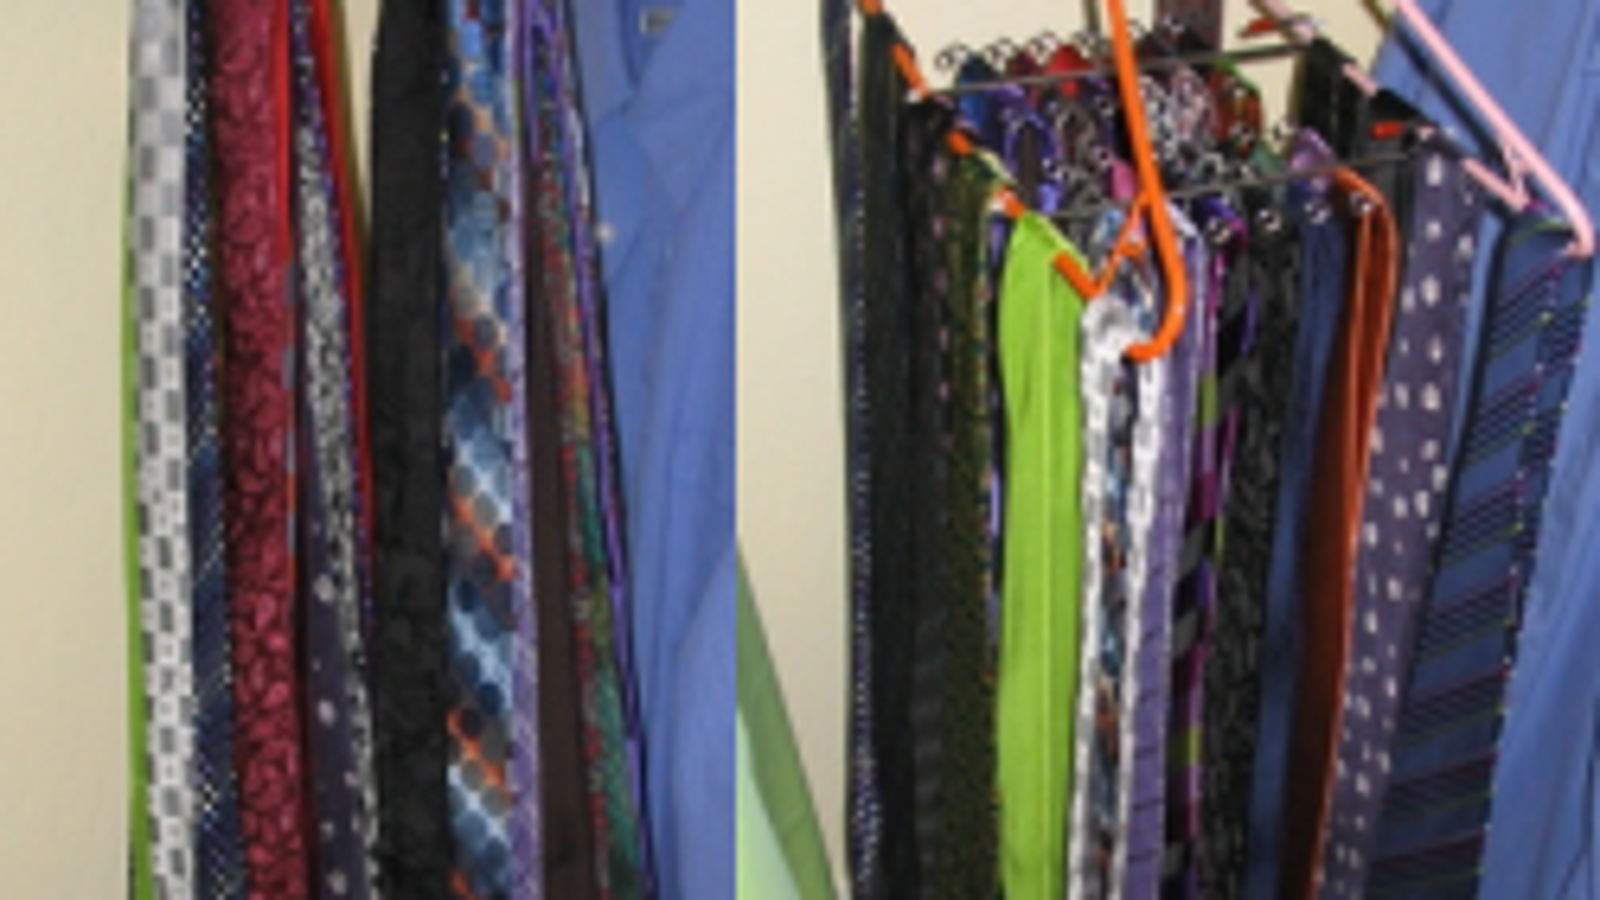 The modified tie rack